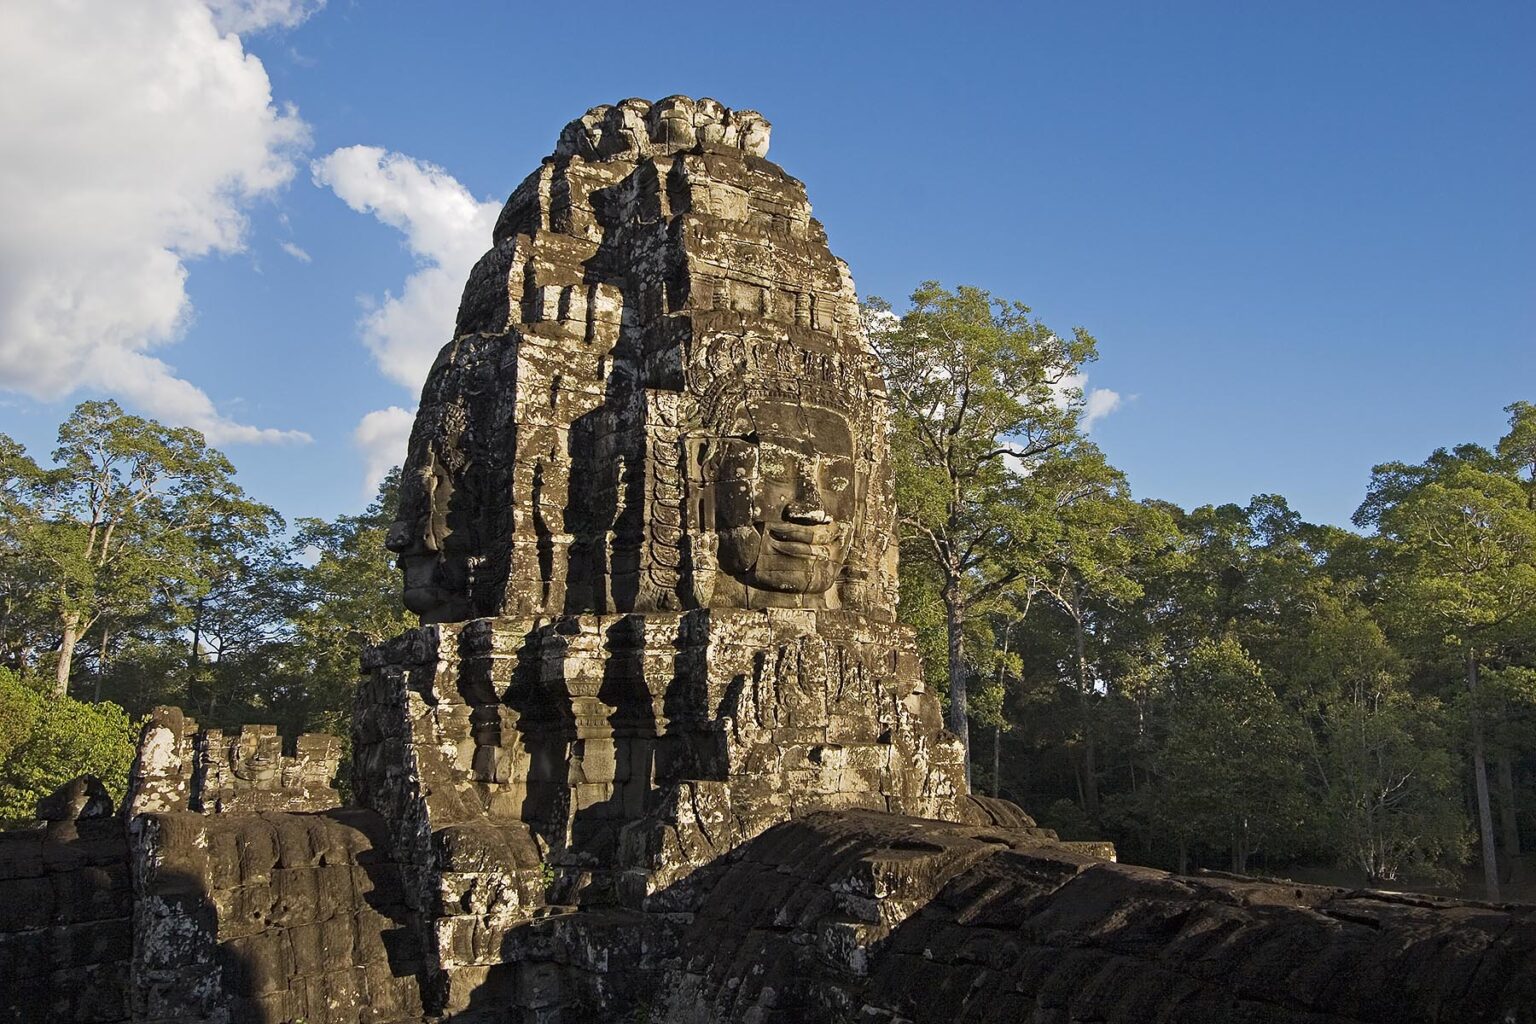 A face tower of The Bayon at Angkor Thom, the largest Khmer city ever built, are part of the Angkor Wat complex - Siem Reap, Cambodia